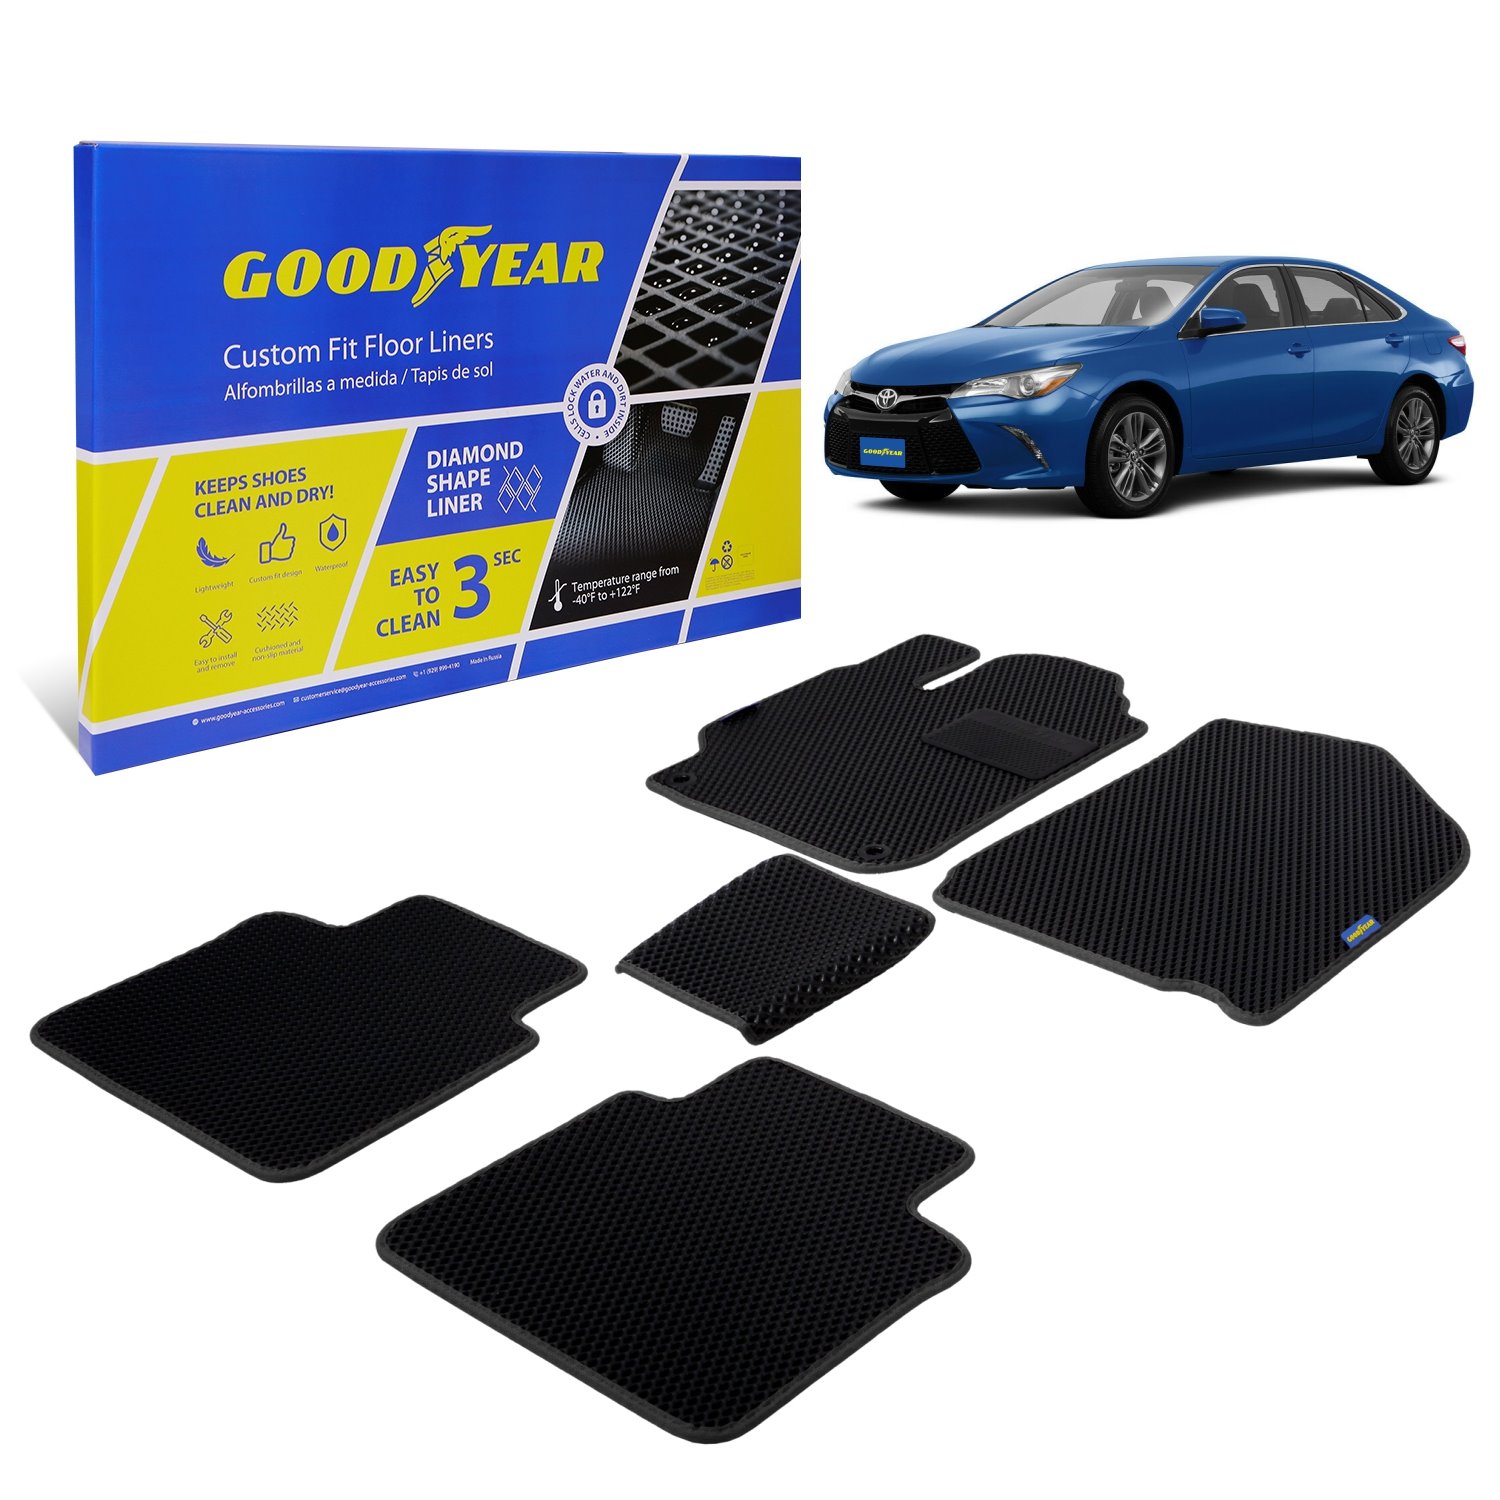 Goodyear Custom-Fit Floor Liners for 2015-2017 Toyota Camry